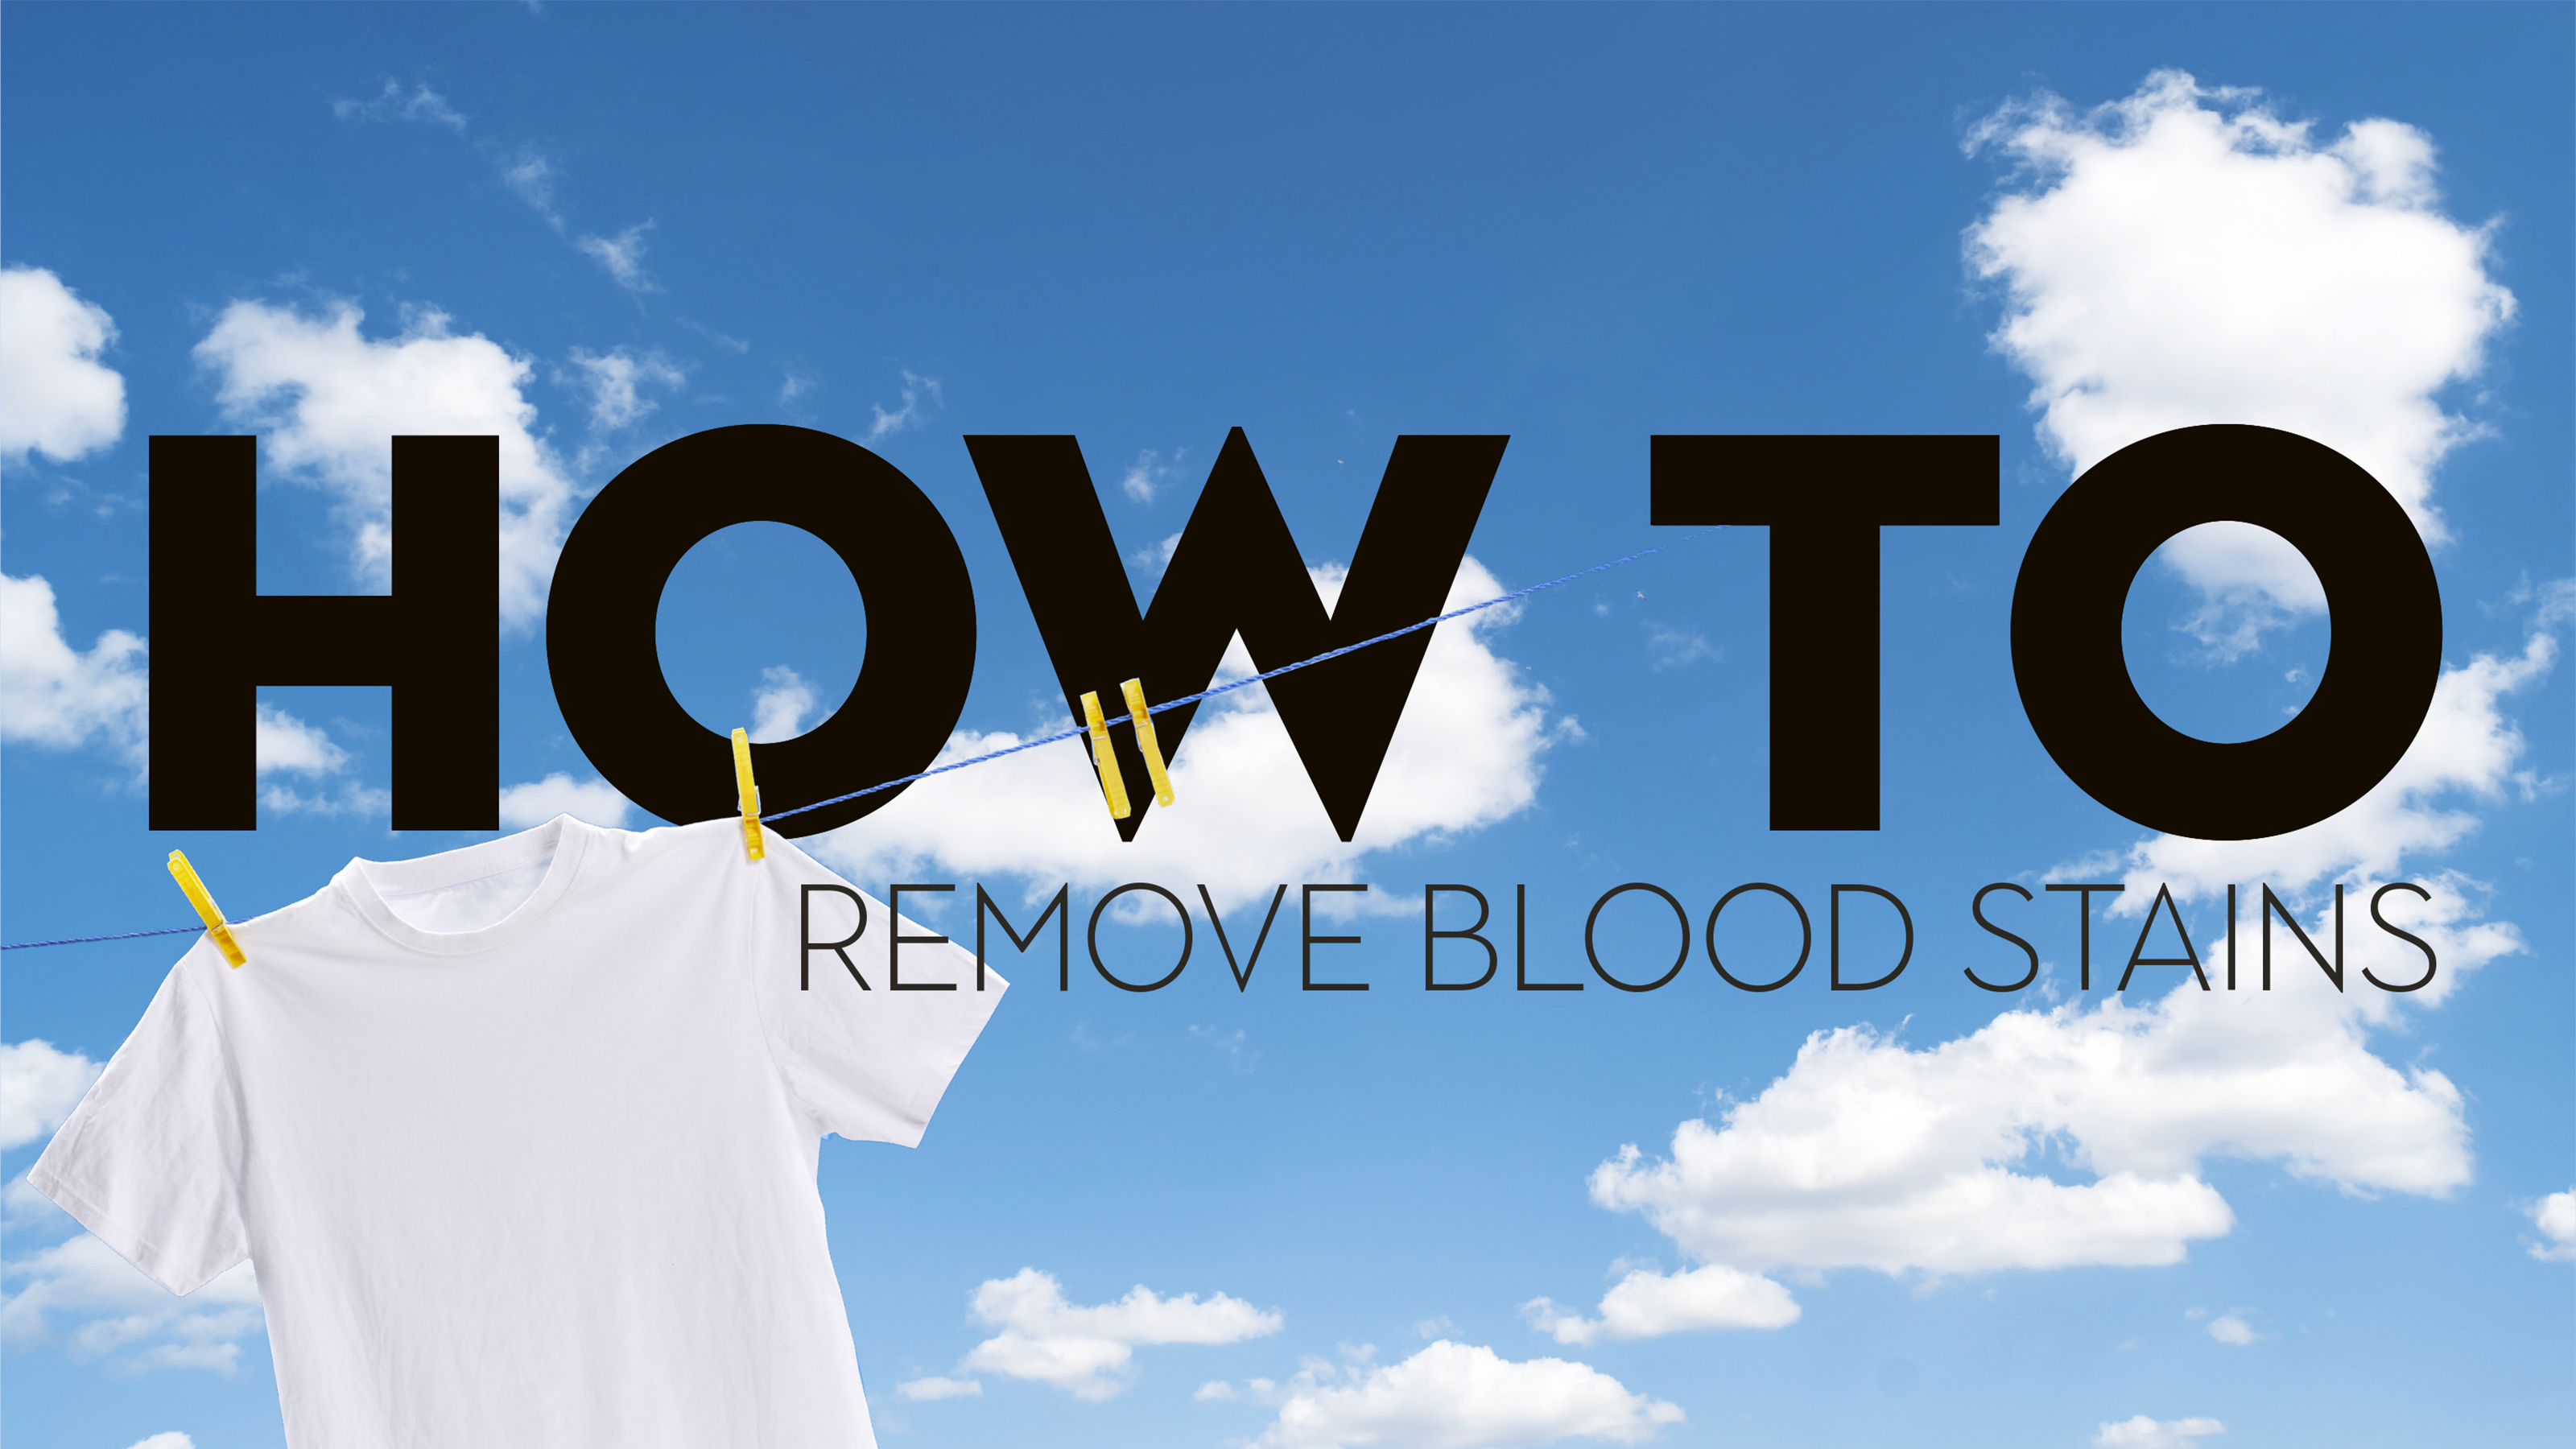 How to Remove Blood From Clothing : 3 Steps (with Pictures